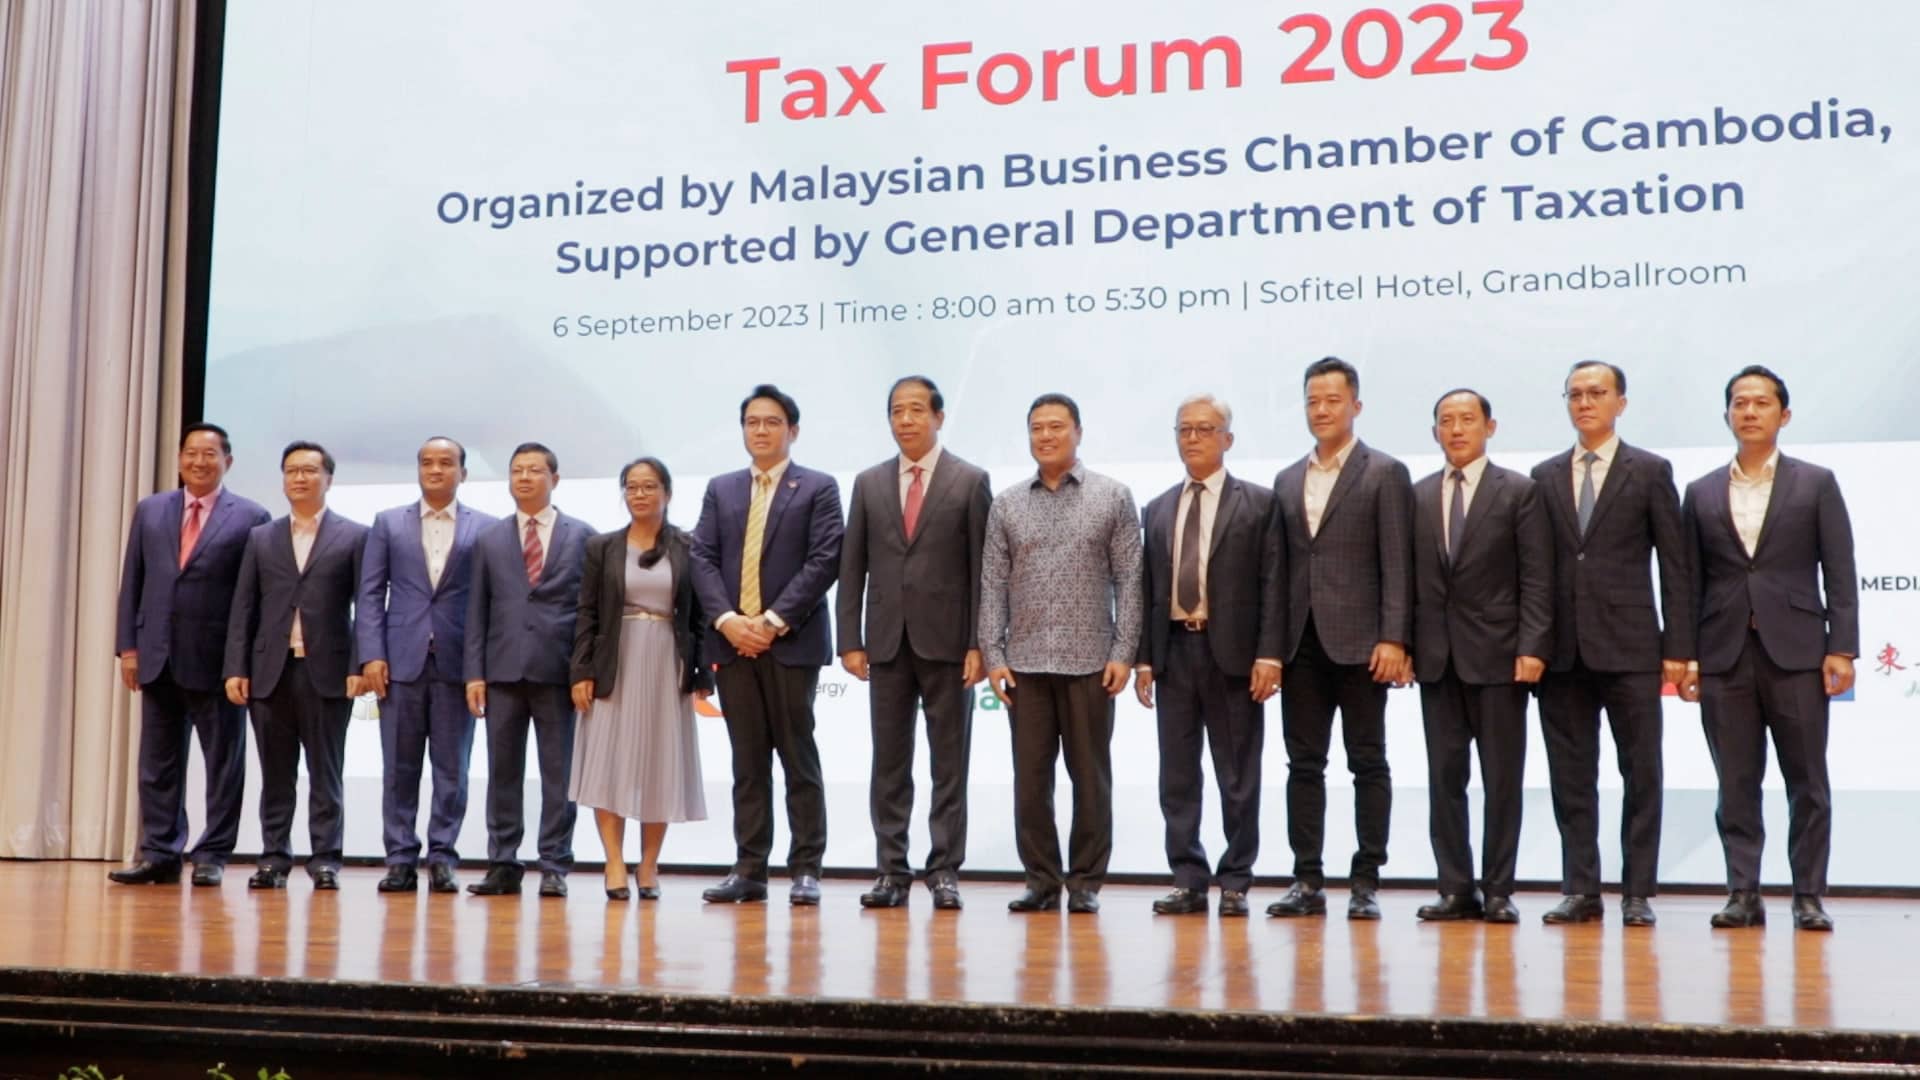 Tax Forum 2023: Panel Discussion on Tax Incentives